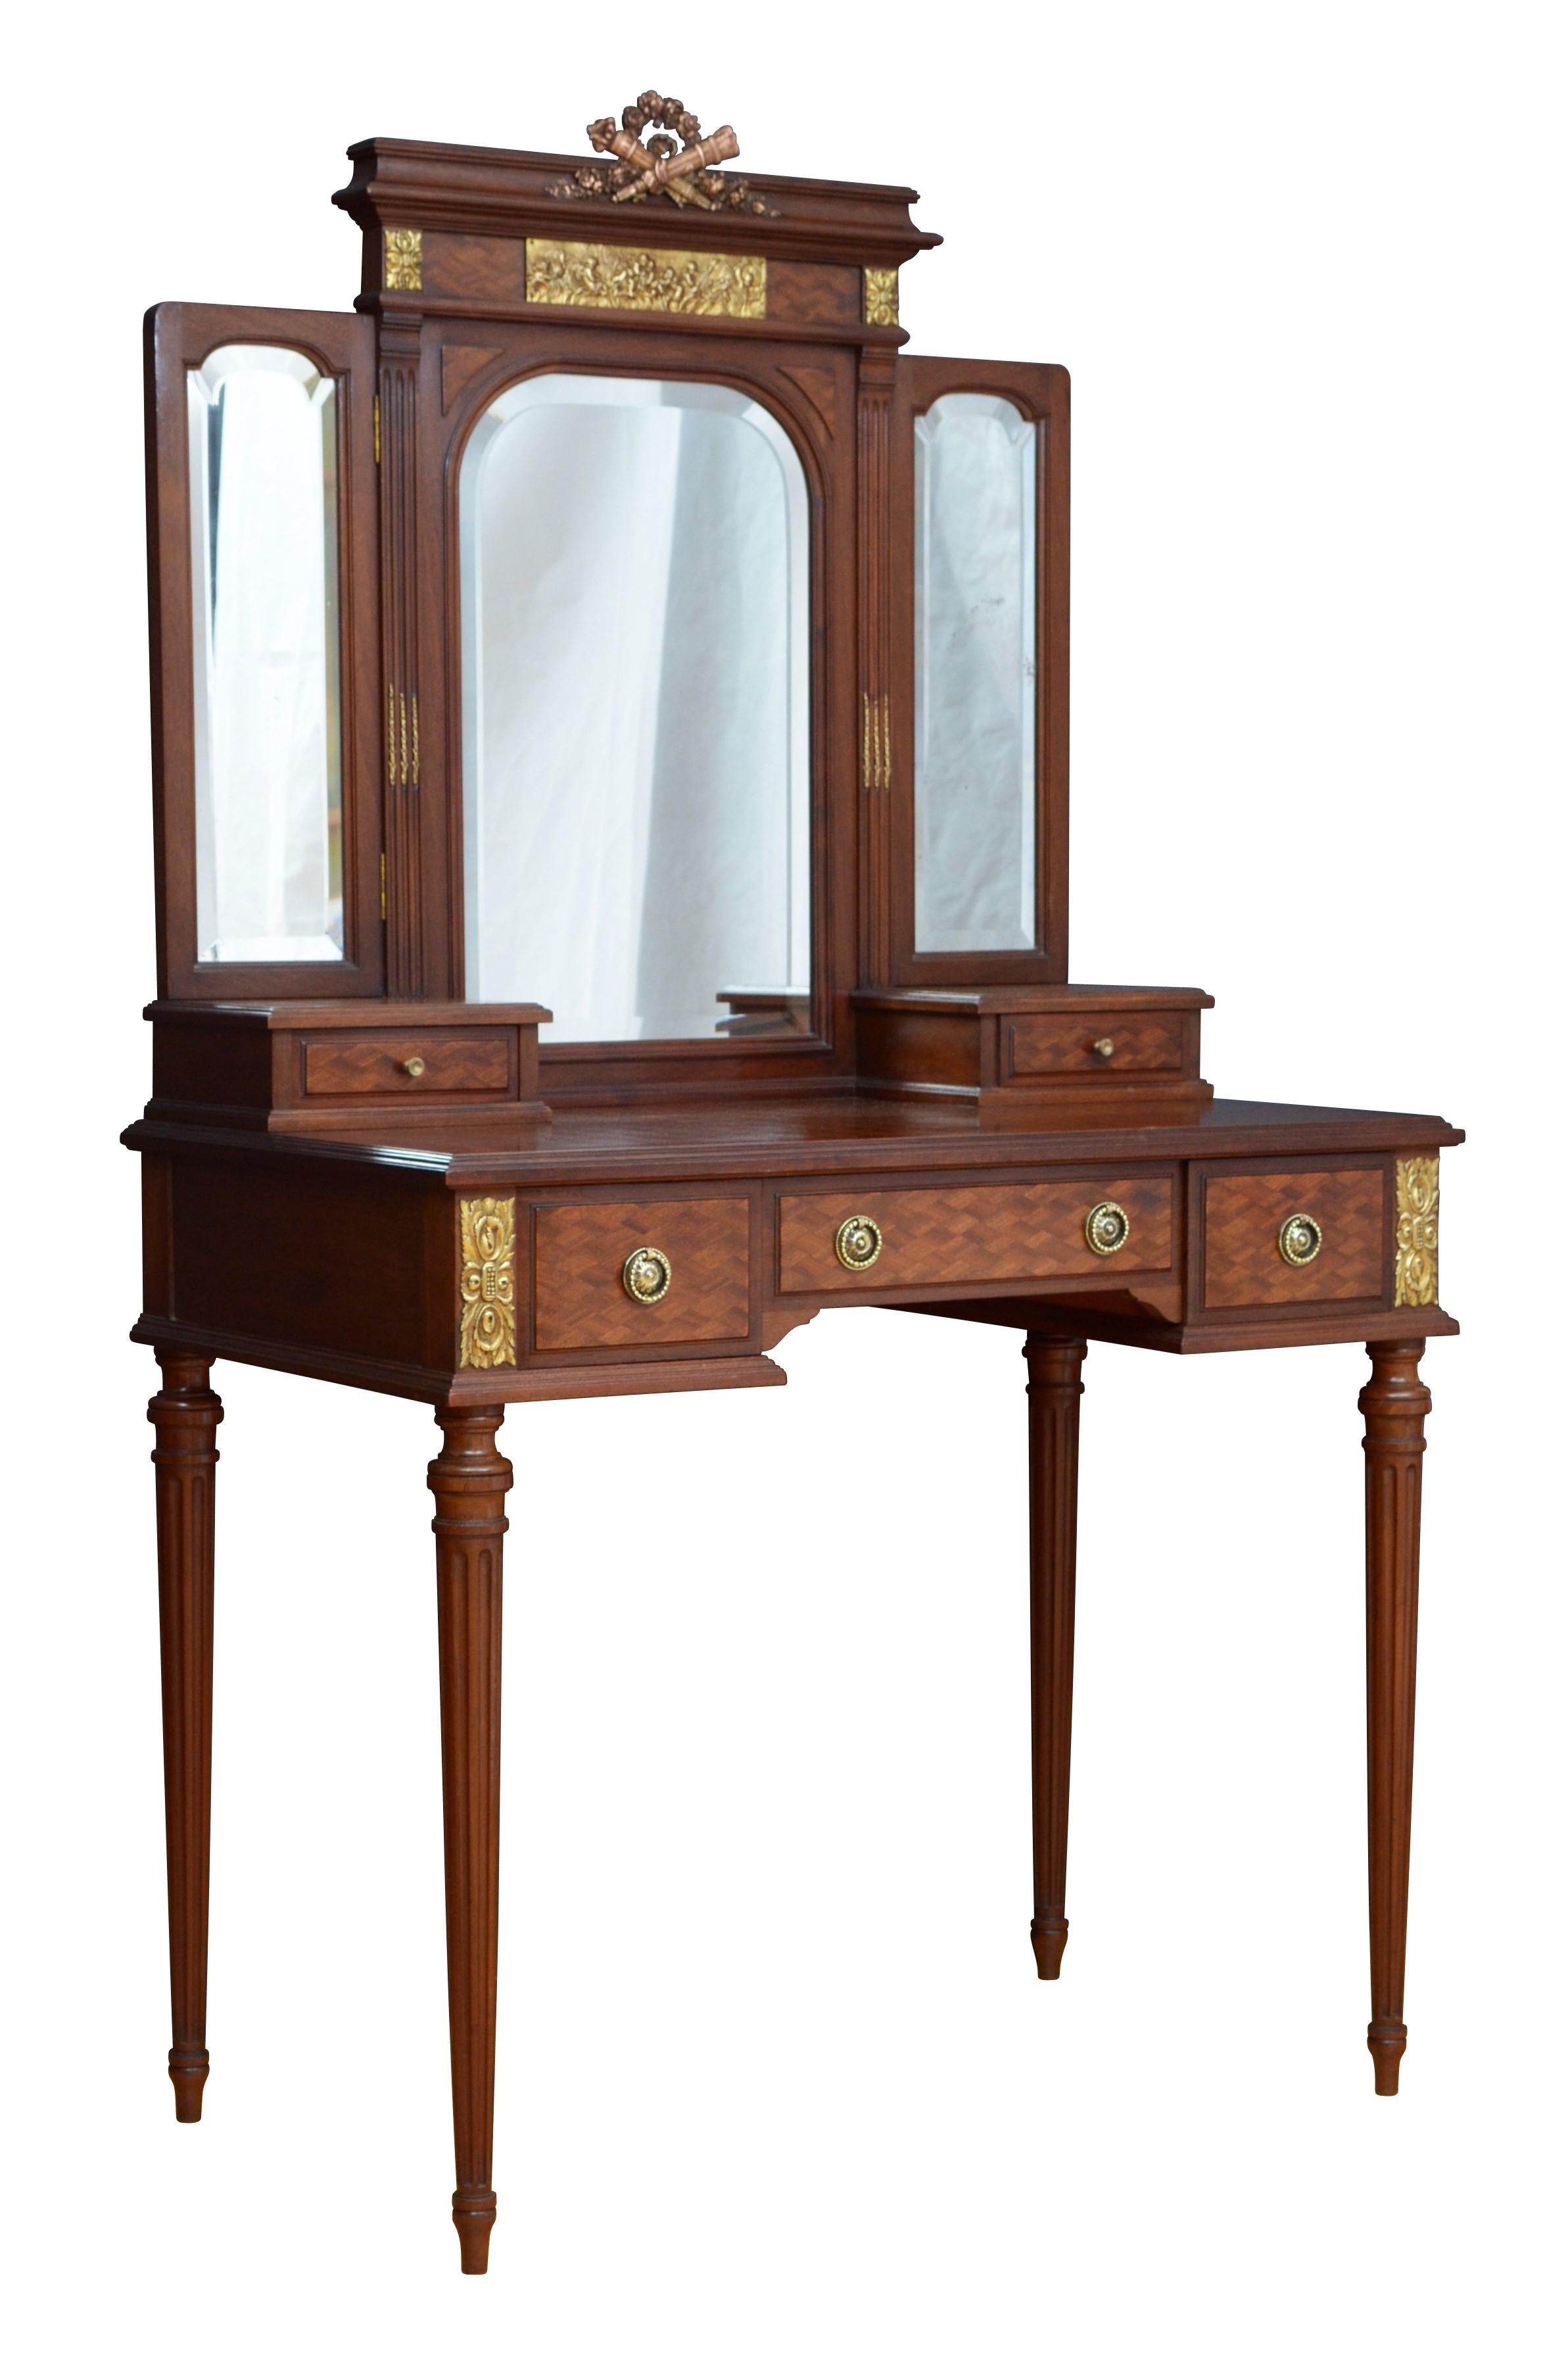 K0 Stylish and very elegant French dressing table in mahogany having shaped triple mirror with original bevelled edge glass (minor imperfections) decorated with a bow to the top above parquetry inlaid top with moulded edge and three frieze drawers